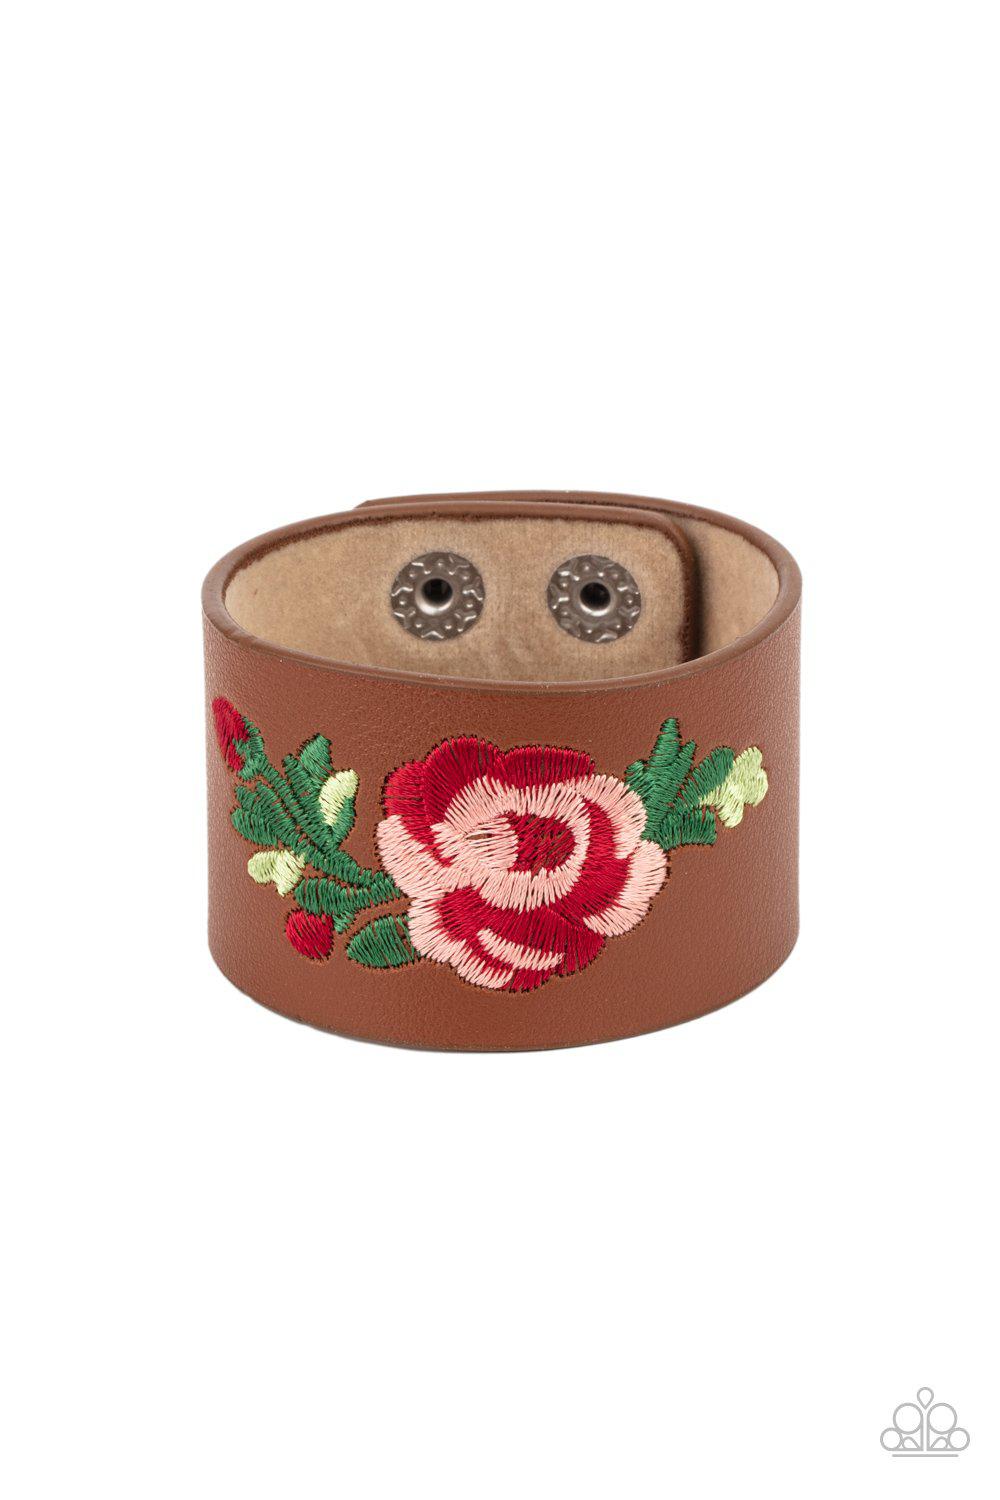 Rebel Rose Brown Leather and Red Rose Floral Urban Wrap Snap Bracelet - Paparazzi Accessories- lightbox - CarasShop.com - $5 Jewelry by Cara Jewels